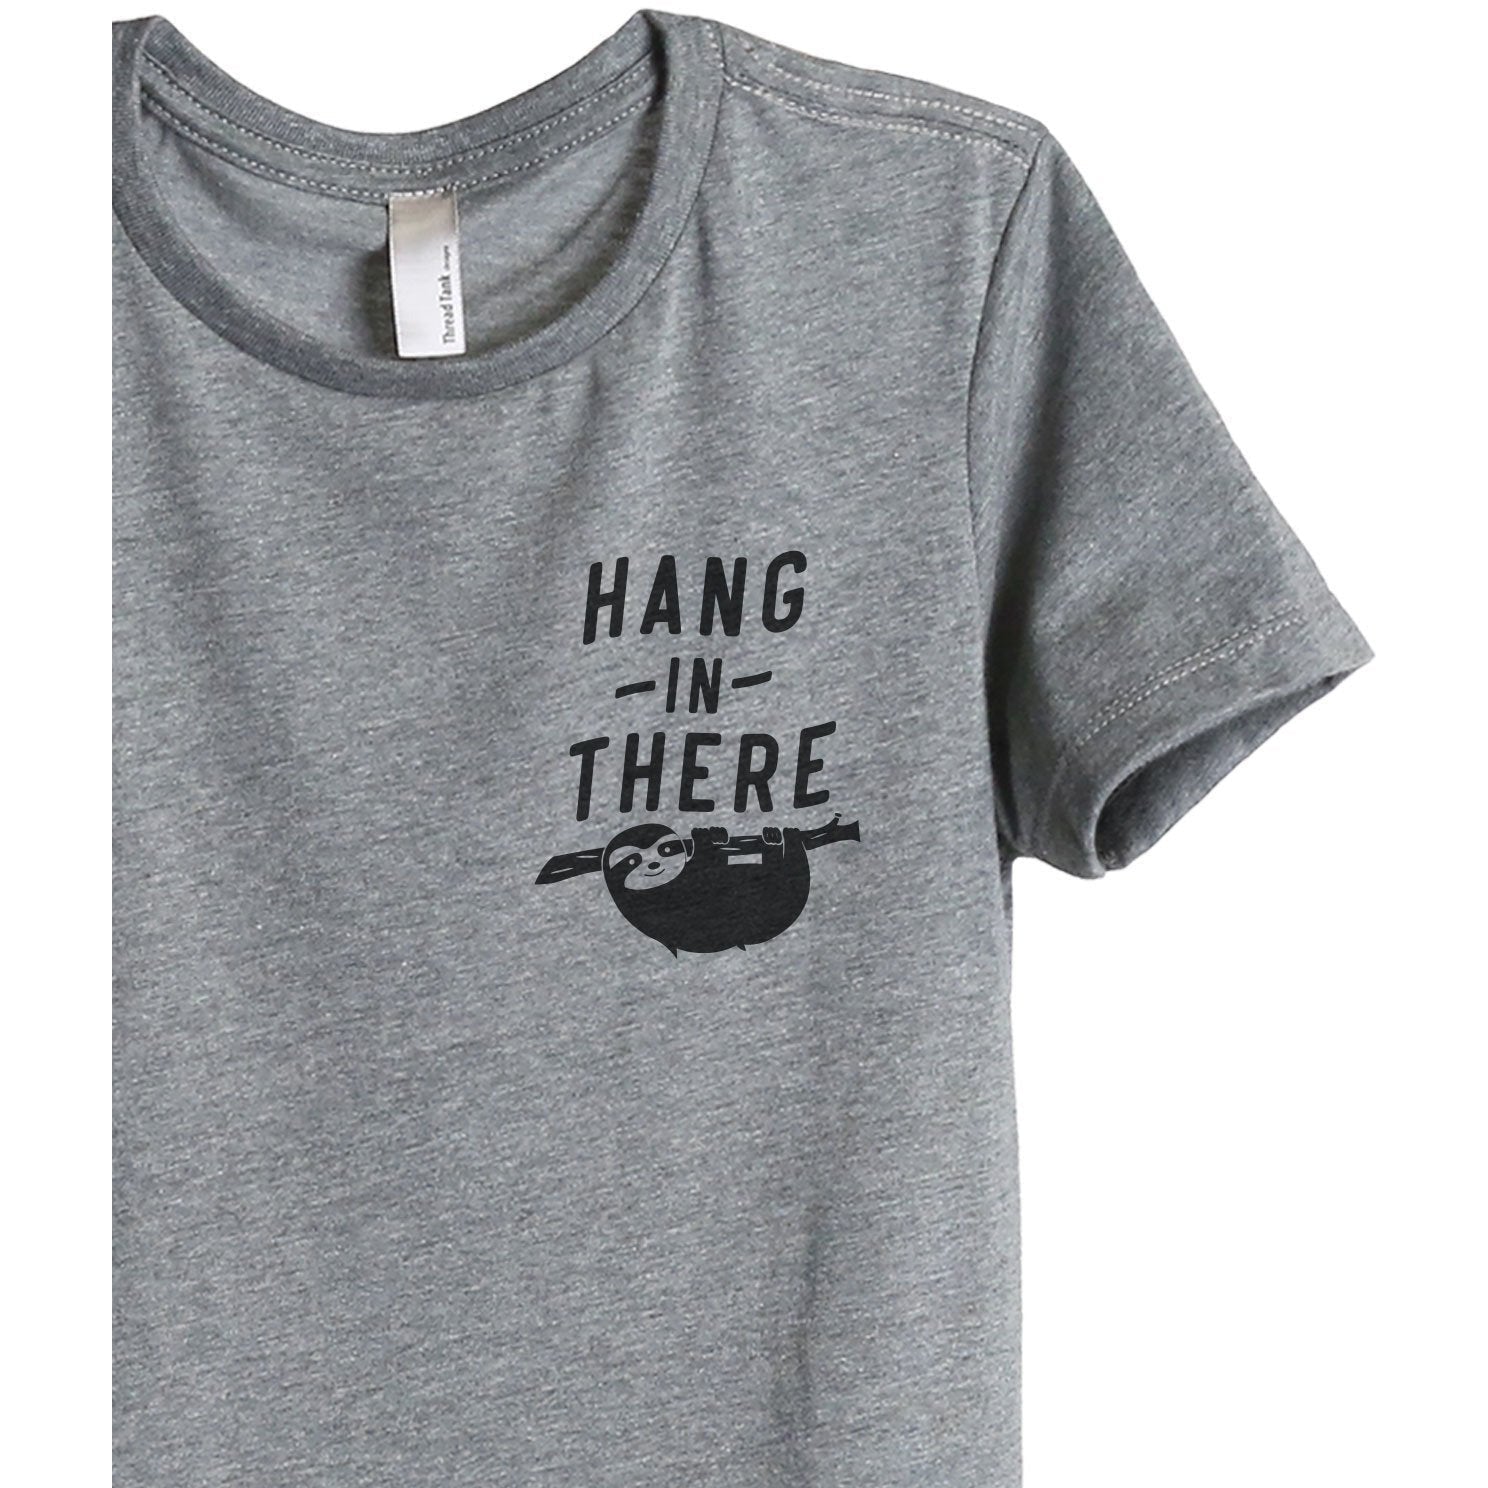 Hang In There Women's Relaxed Crewneck T-Shirt Top Tee Heather Grey Zoom Details
